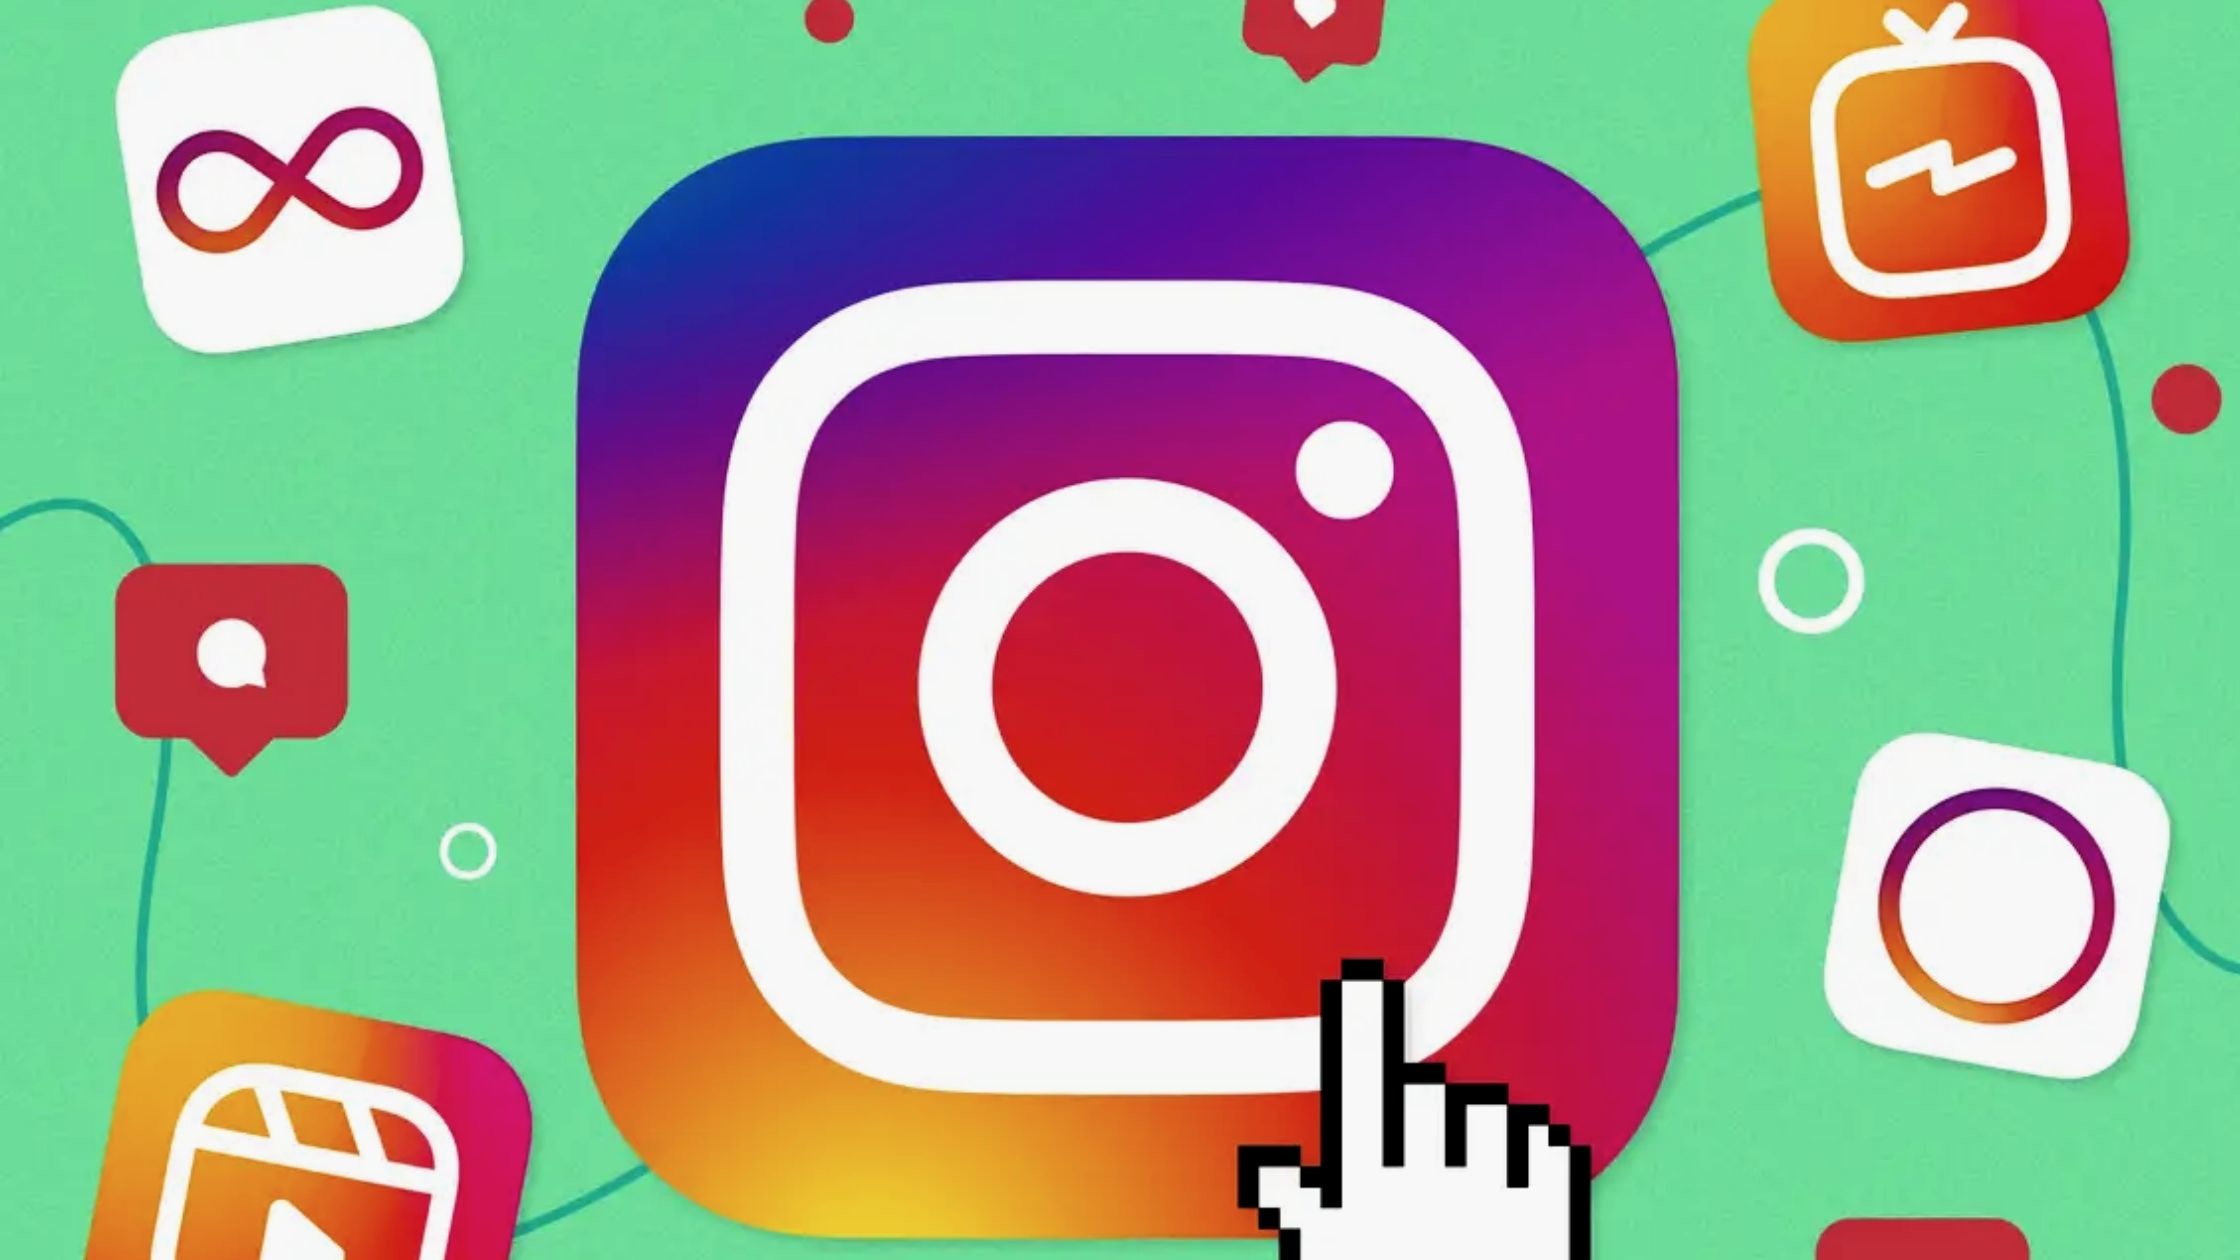 SmiHub User Guide & Review of The Best Instagram Story Downloader